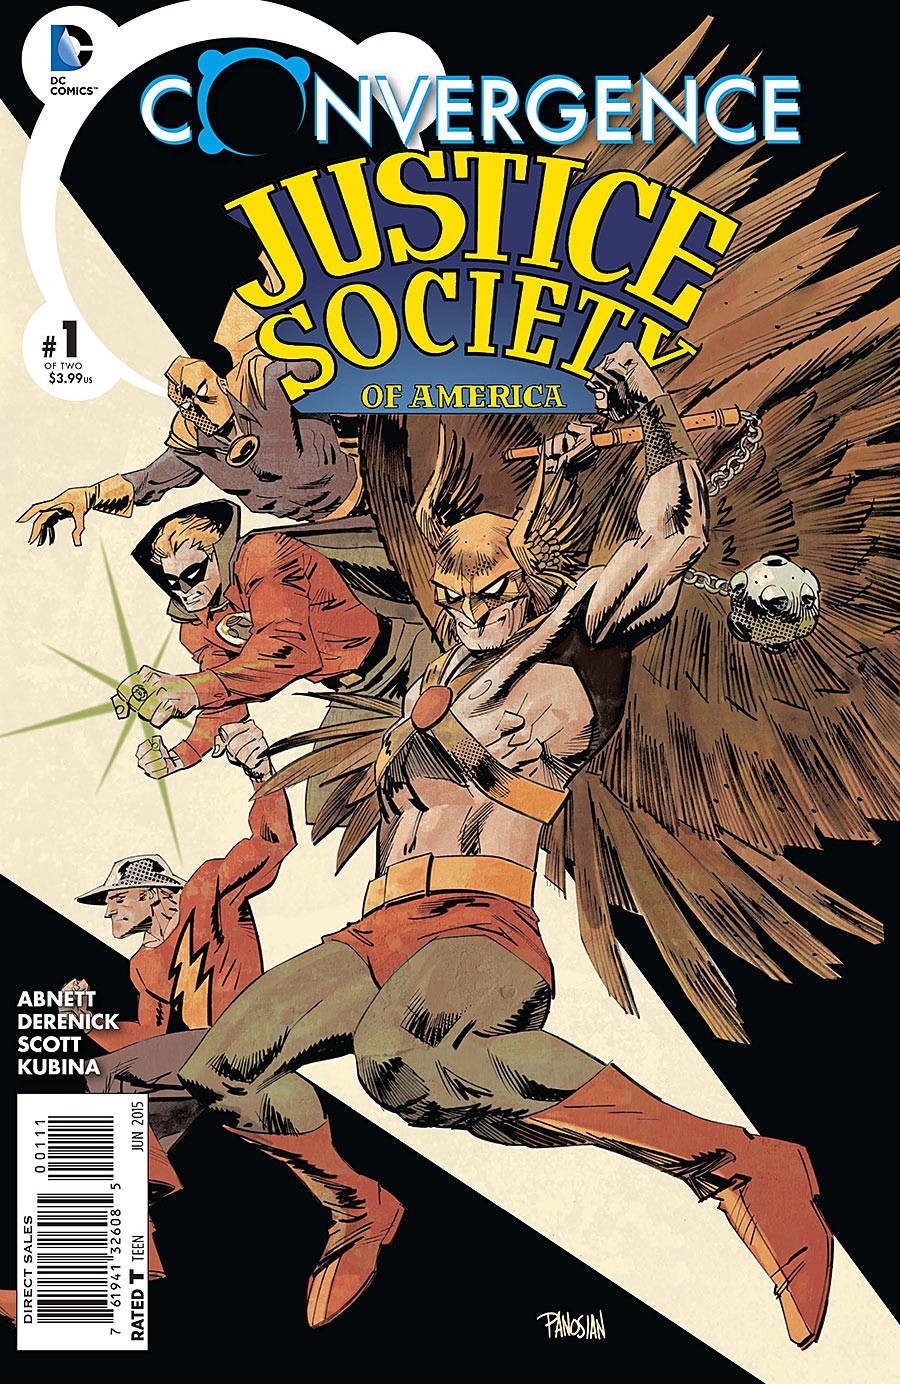 Convergence: Justice Society of America Vol. 1 #1